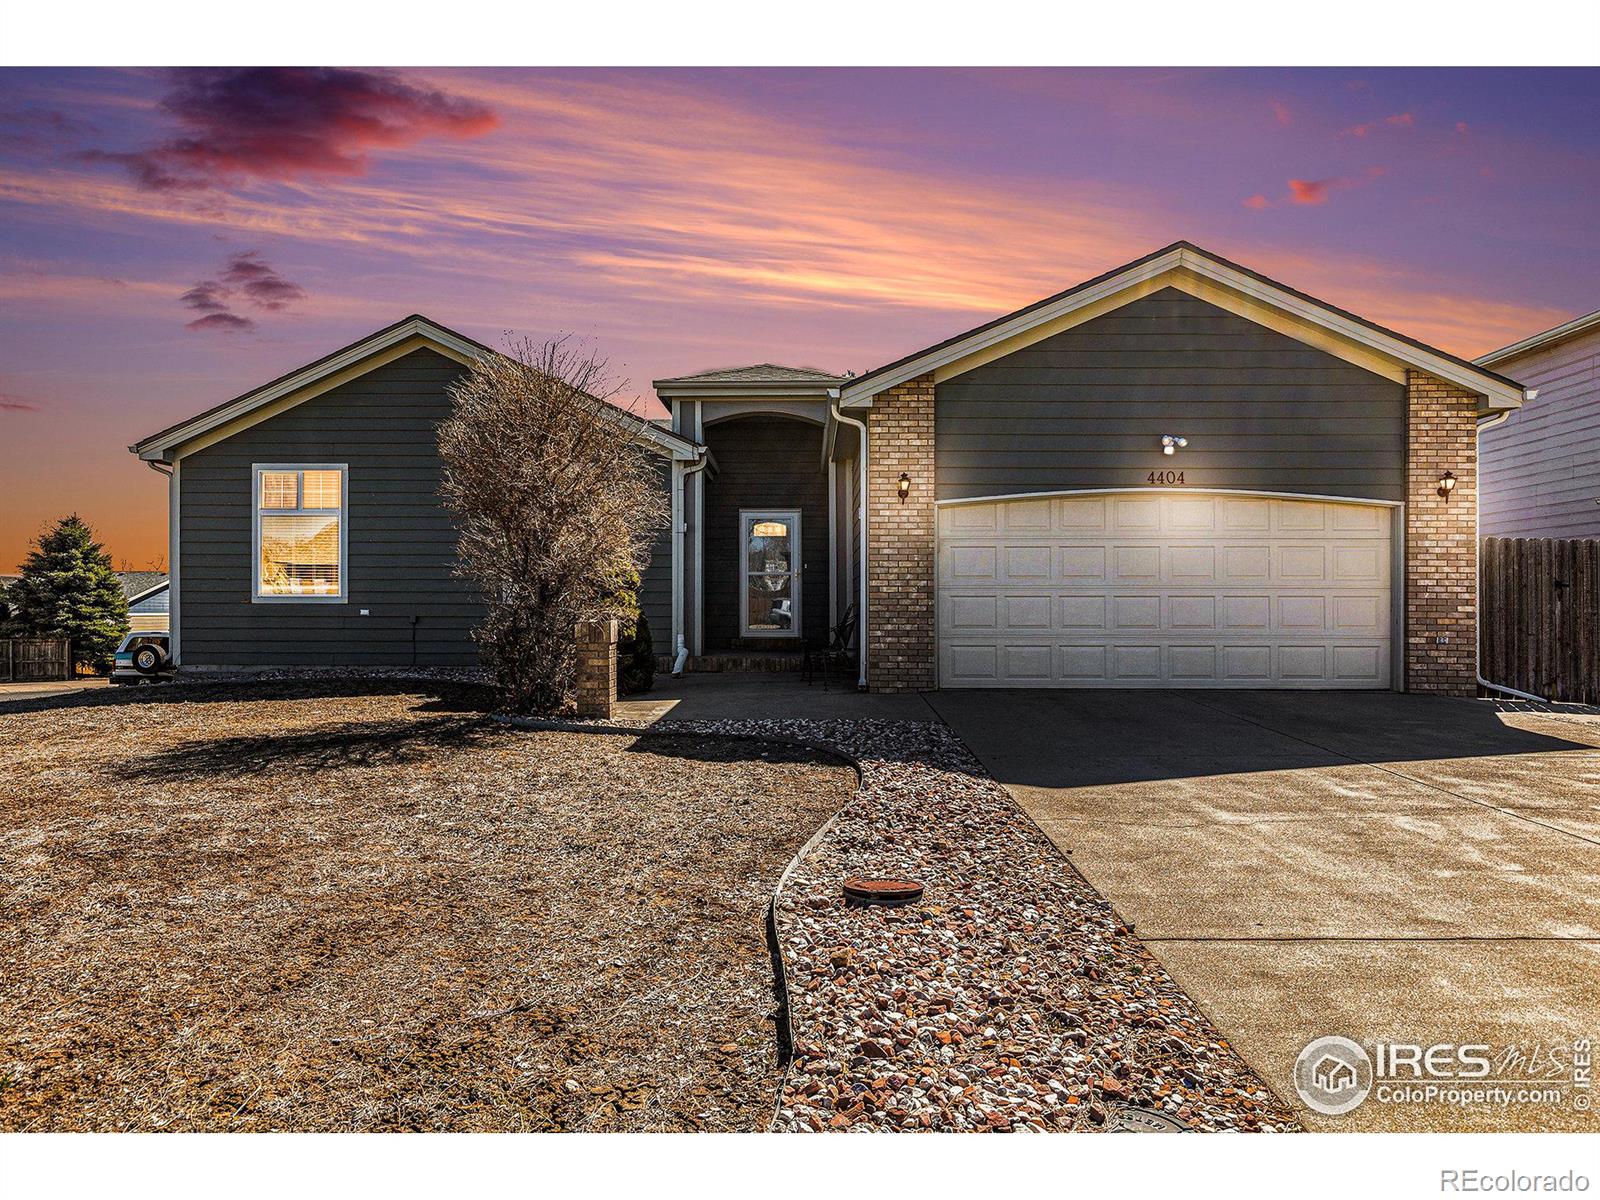 4404 W 14th St Dr, greeley MLS: 4567891006743 Beds: 4 Baths: 3 Price: $495,000